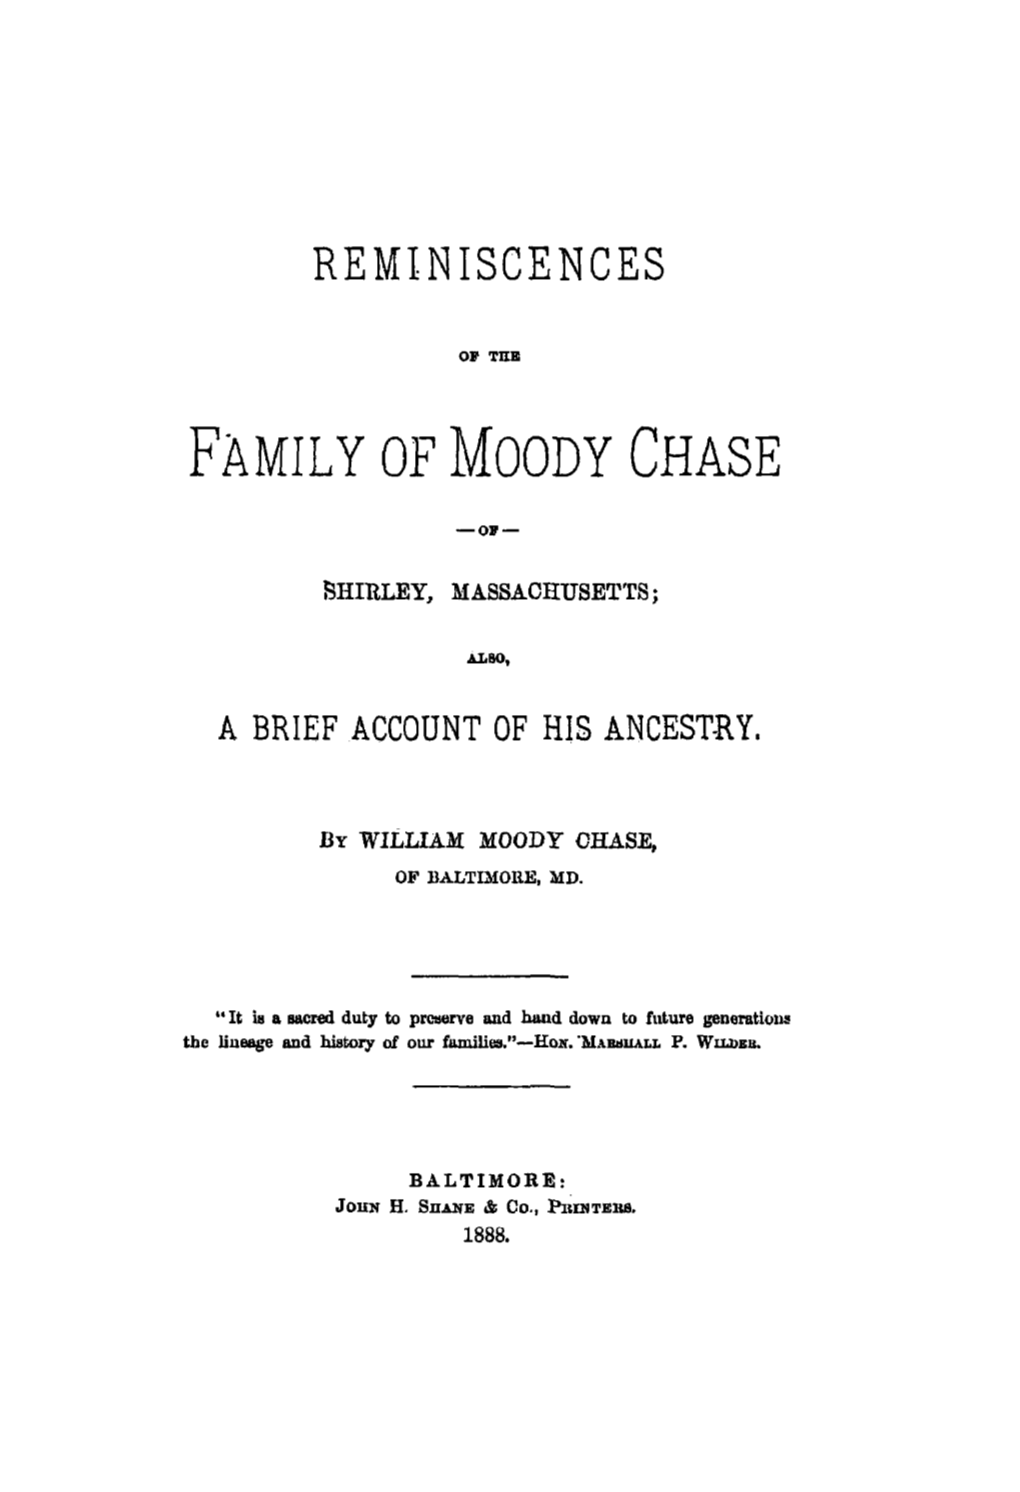 Family of Moody Chase